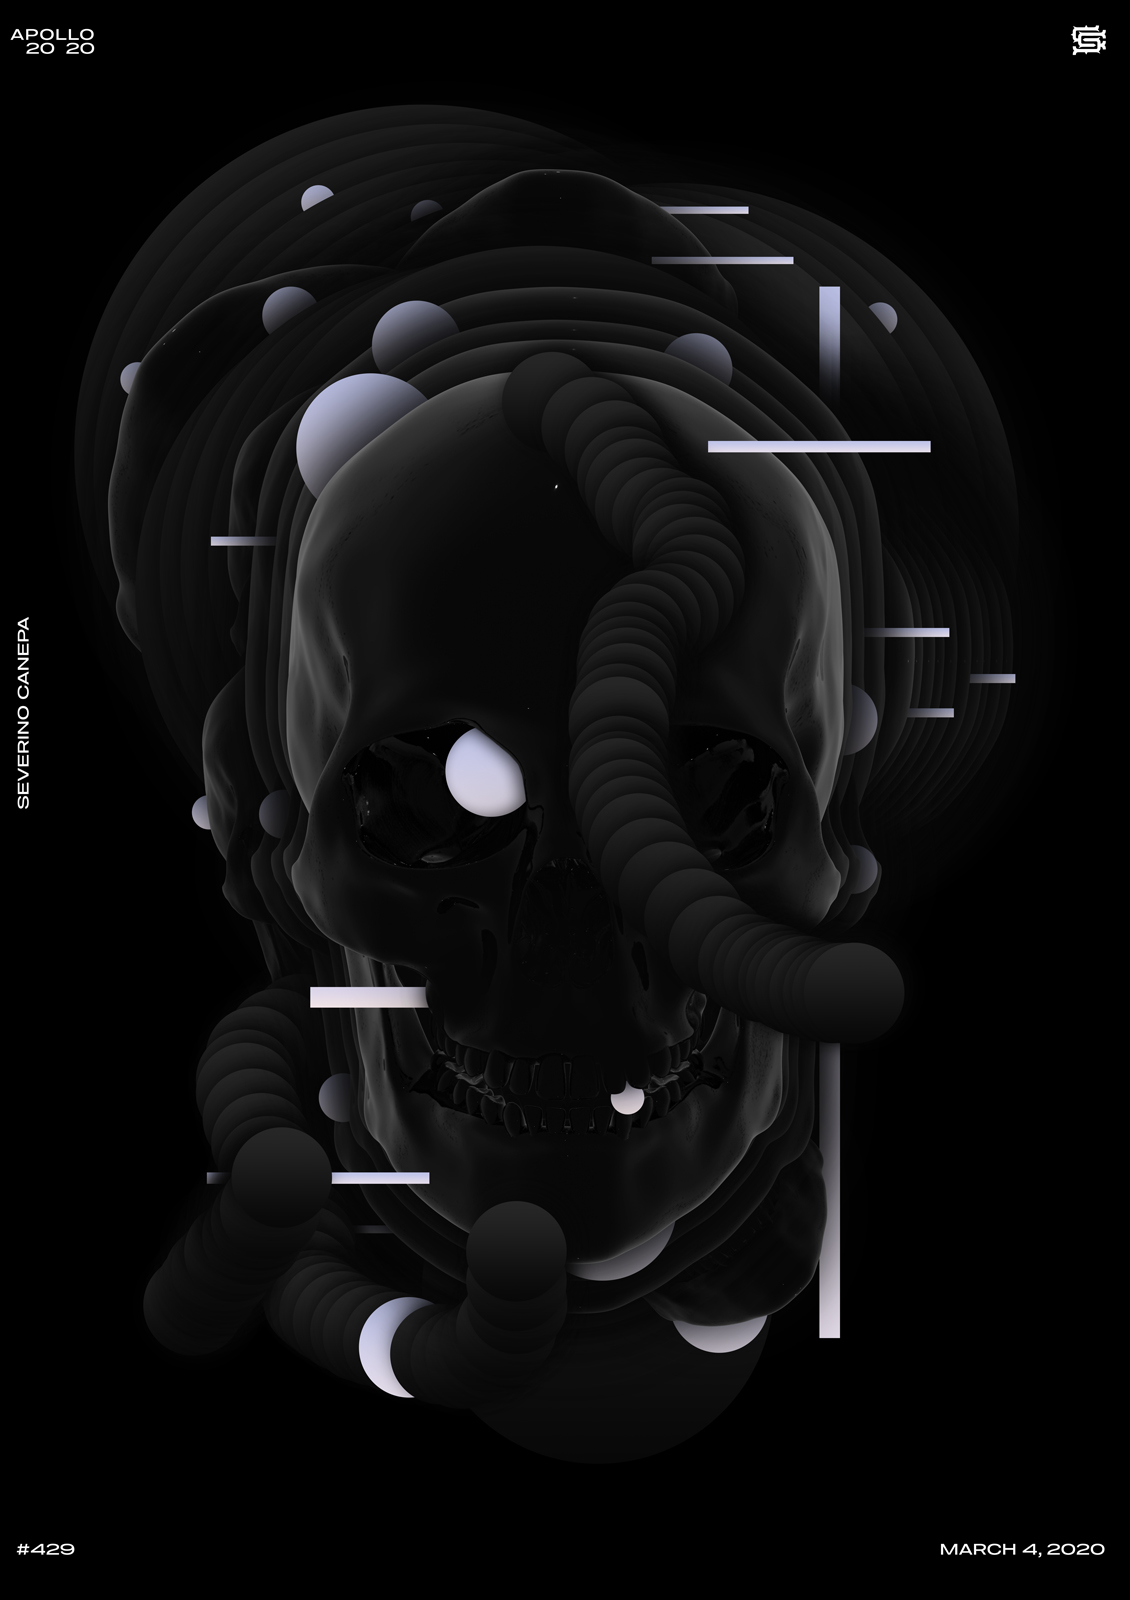 The Black Skull 8 visual art in graphic design made with a 3D Skull